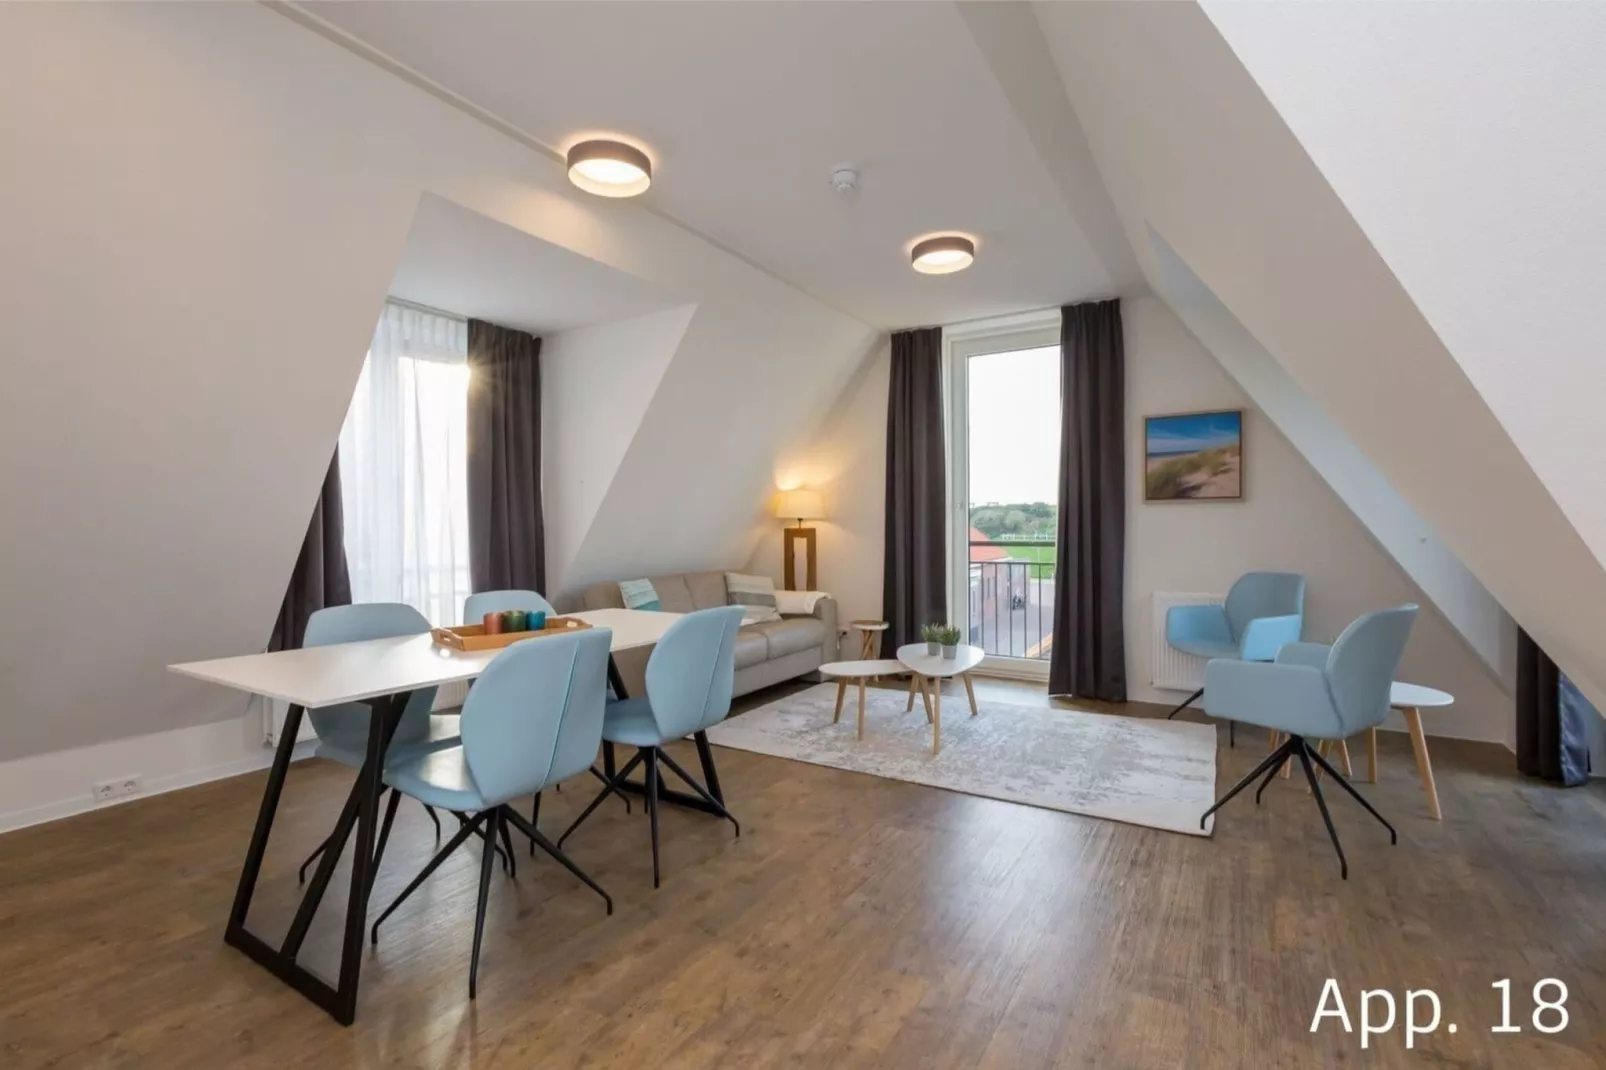 Aparthotel Zoutelande - 6 pers luxe appartement huisdier-Woonkamer